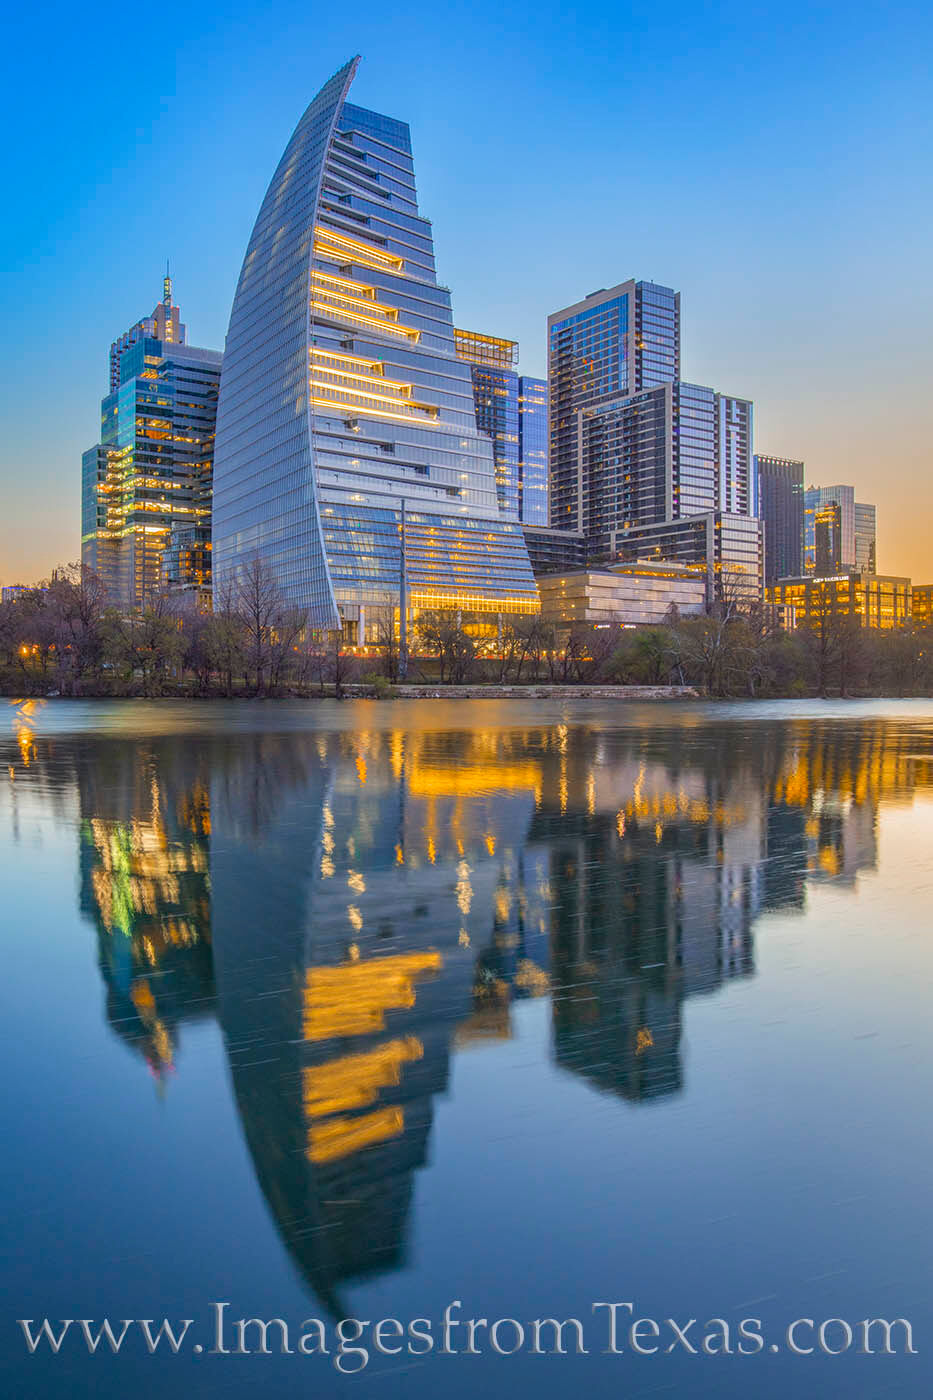 A long exposure brought out the deep blue color well before sunrise in downtown Austin, Texas. In the forefront of this scene...